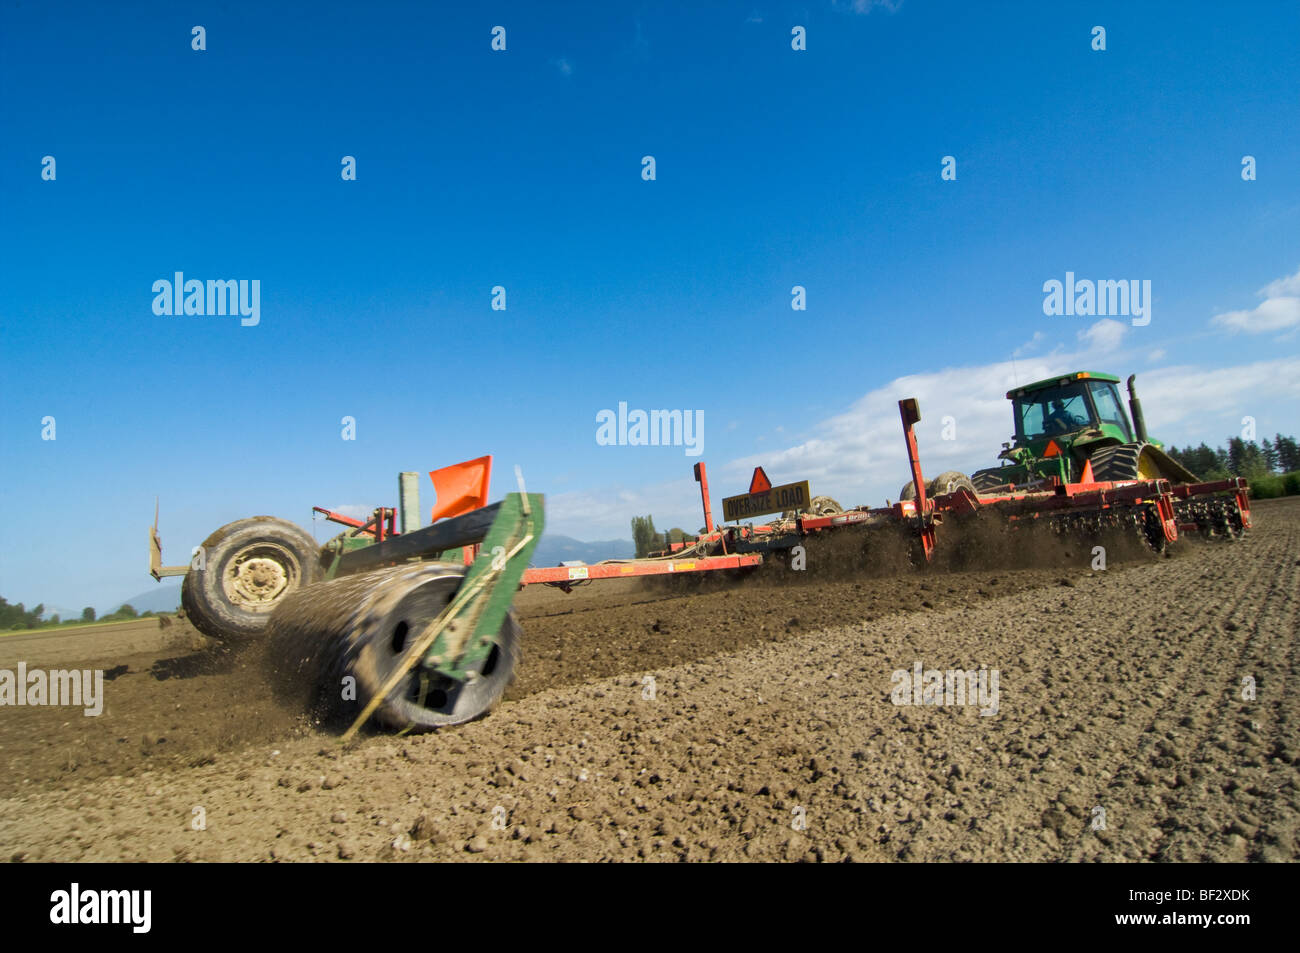 Agriculture - A tractor pulling a mulcher prepares a seedbed for planting potatoes / near Burlington, Washington, USA. Stock Photo